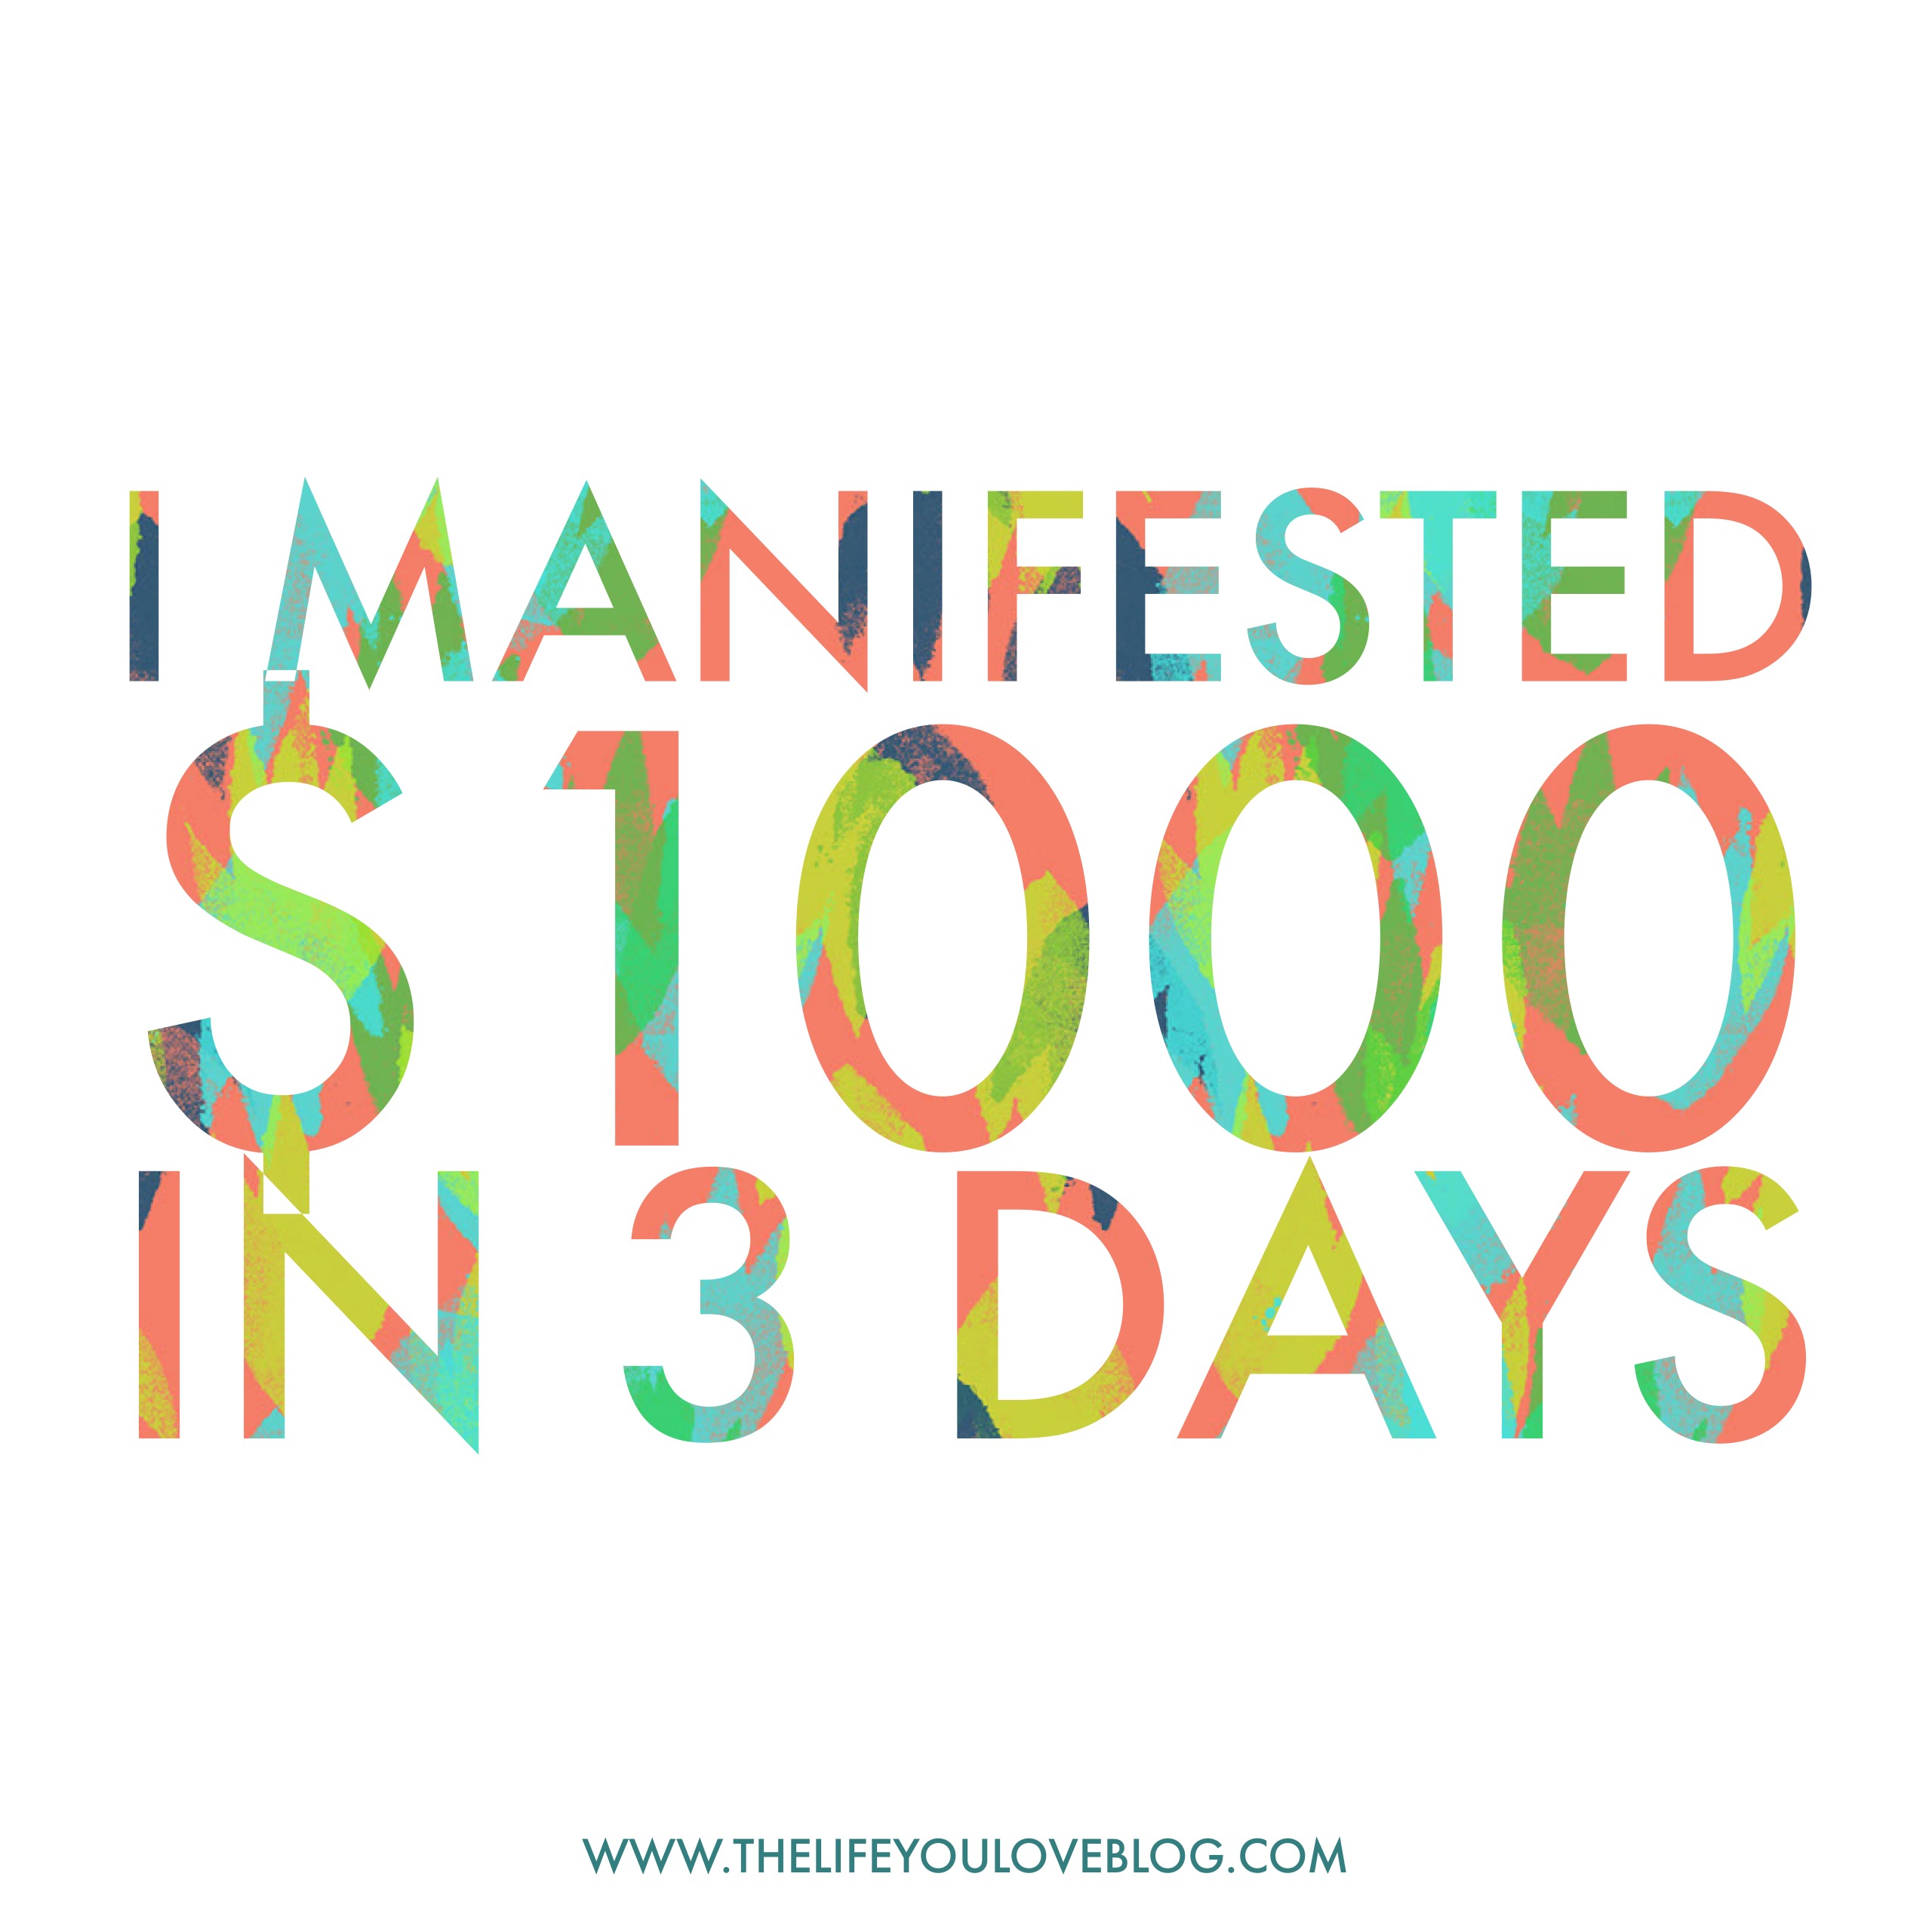 How I Manifested $1000 in 3 Days